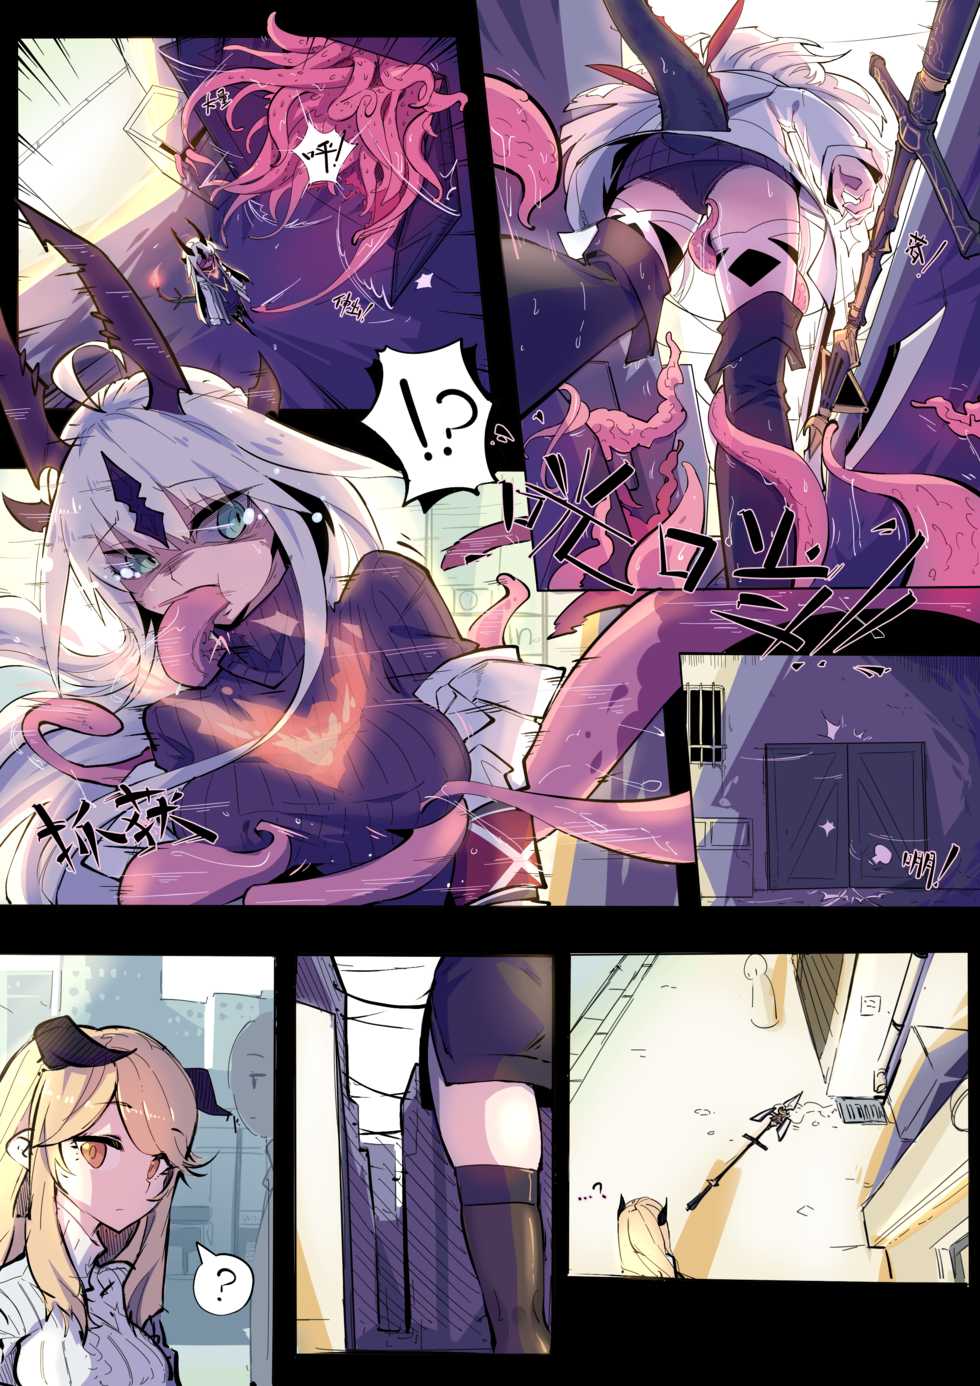 [Animarcat] ~Top Secret File: Tentacle Time~ reedround-CthulhuVSCharmder of RHODES ISLAND (Arknights) [English] - Page 4